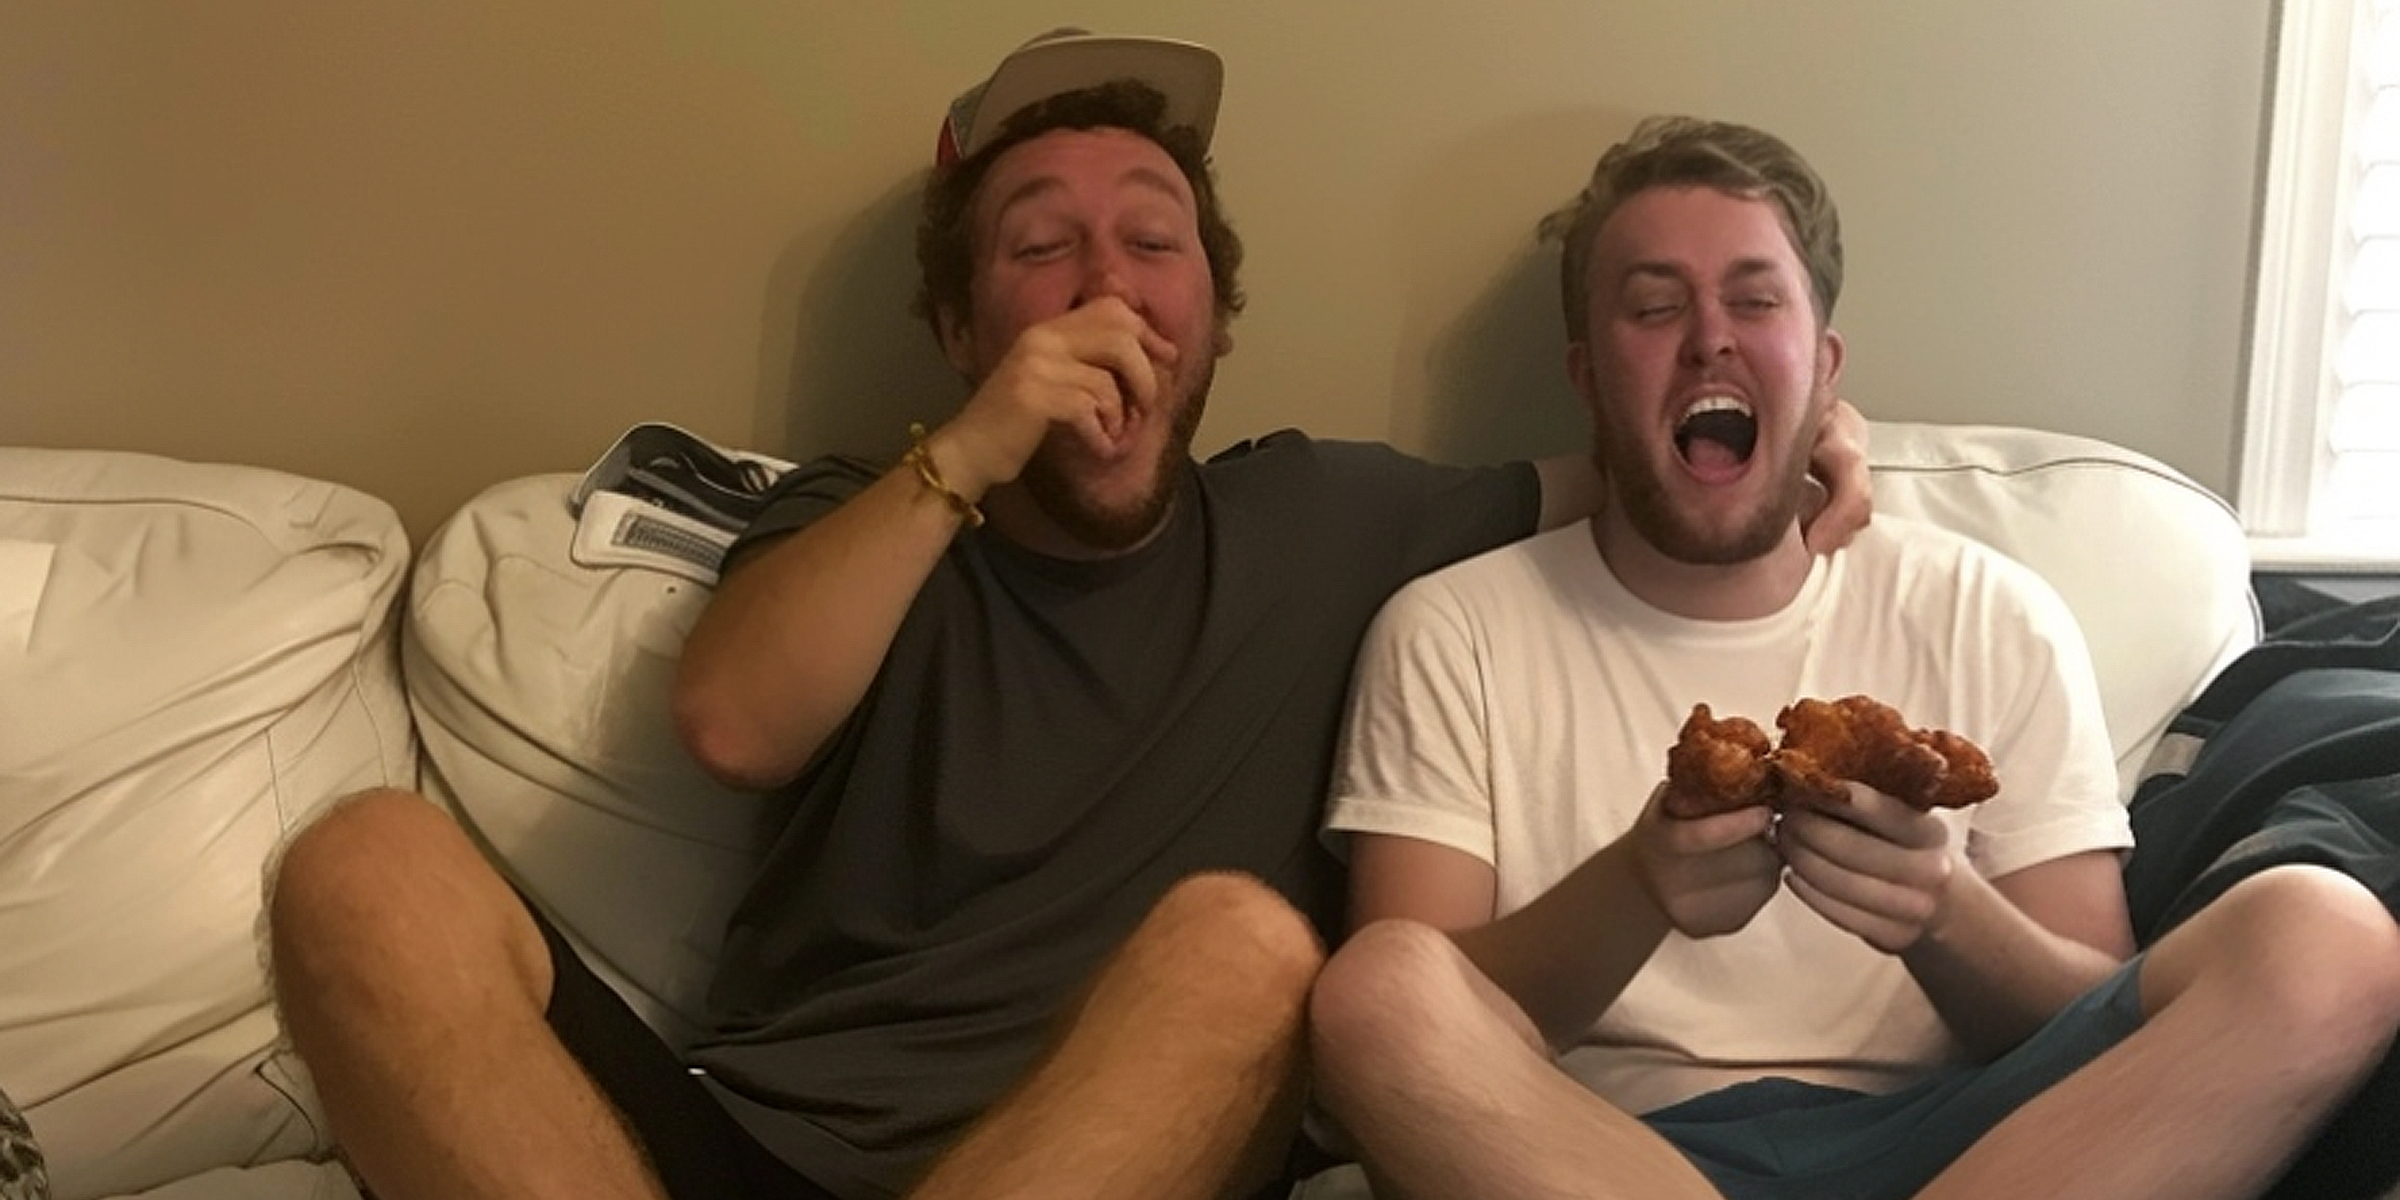 Two men eating and laughing on a couch | Source: AmoMama